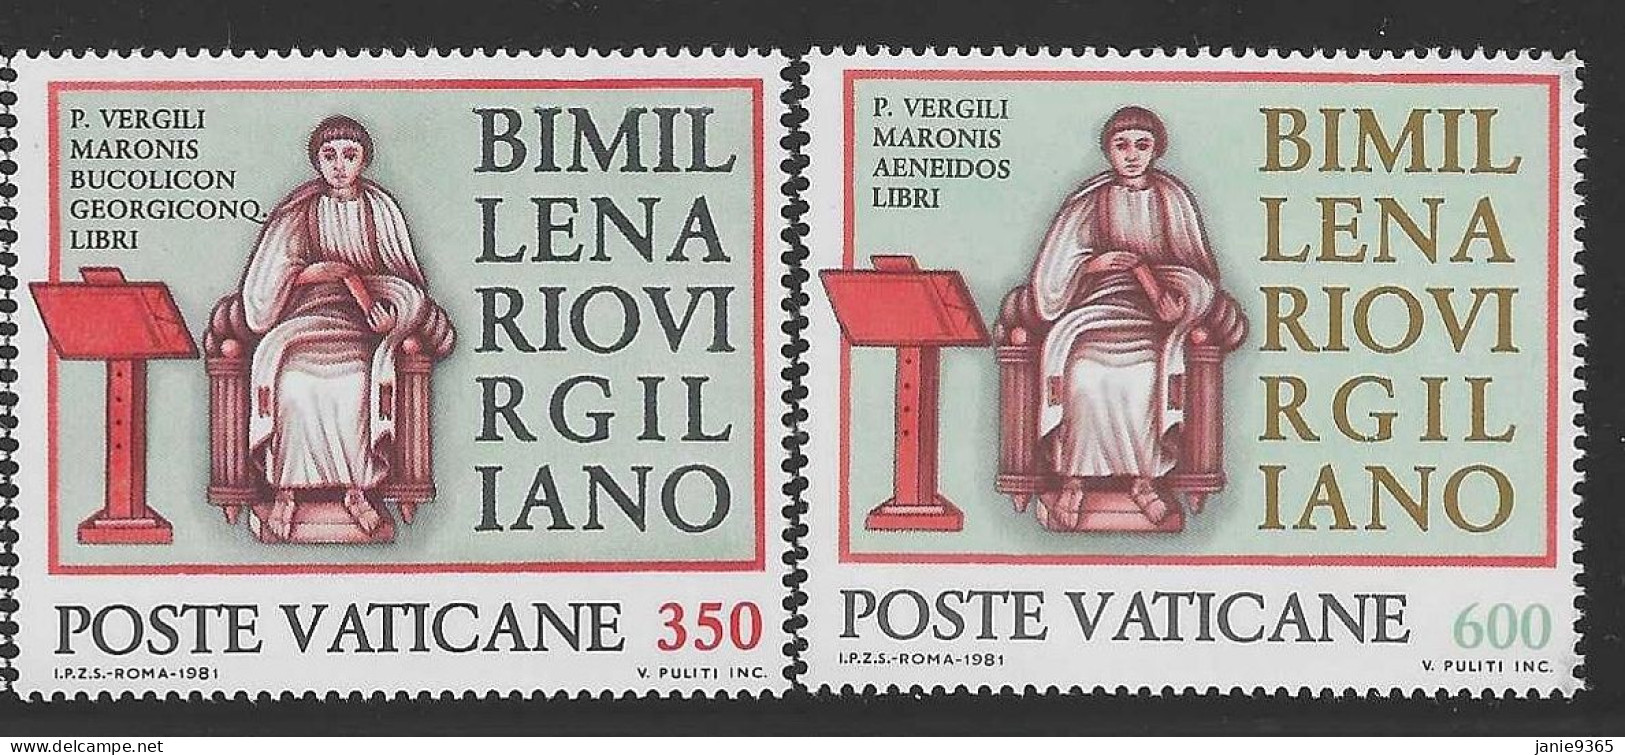 Vatican City S 701-02 1981 Binillenary Birth Of Virgil.mint Never Hinged - Unused Stamps